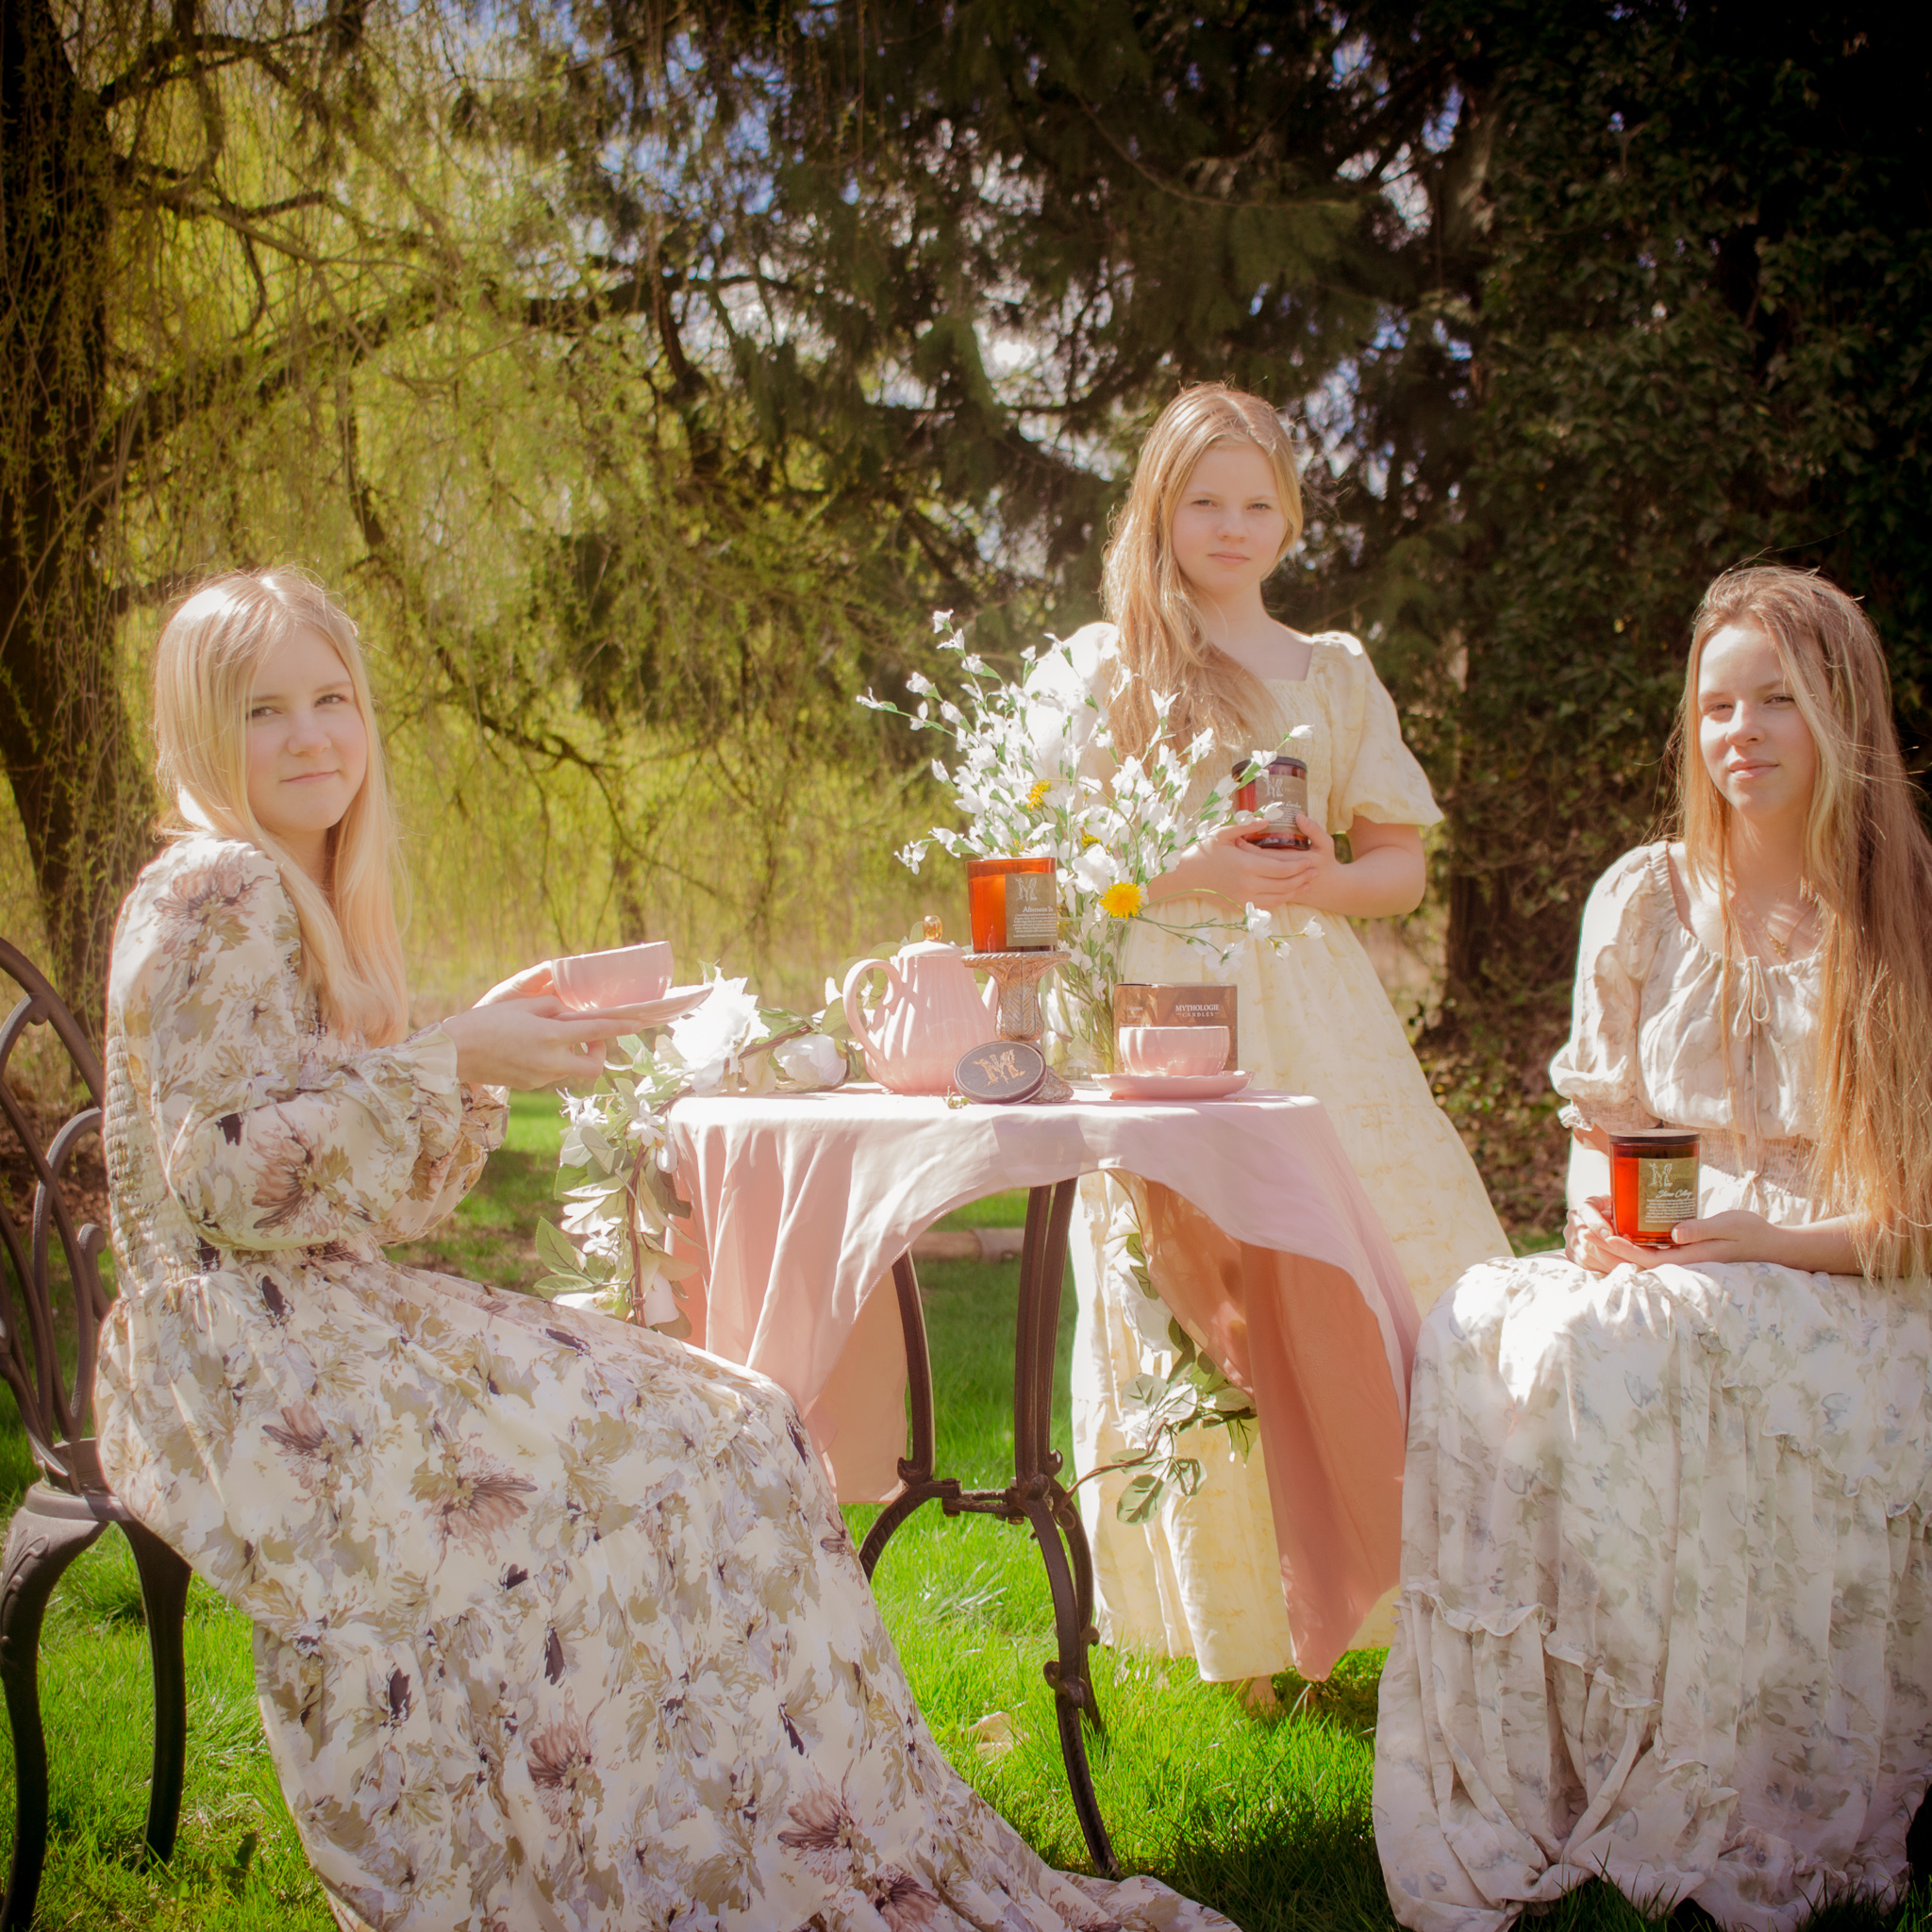 Three young ladies in pastel floral smock dresses having an outdoor tea party.